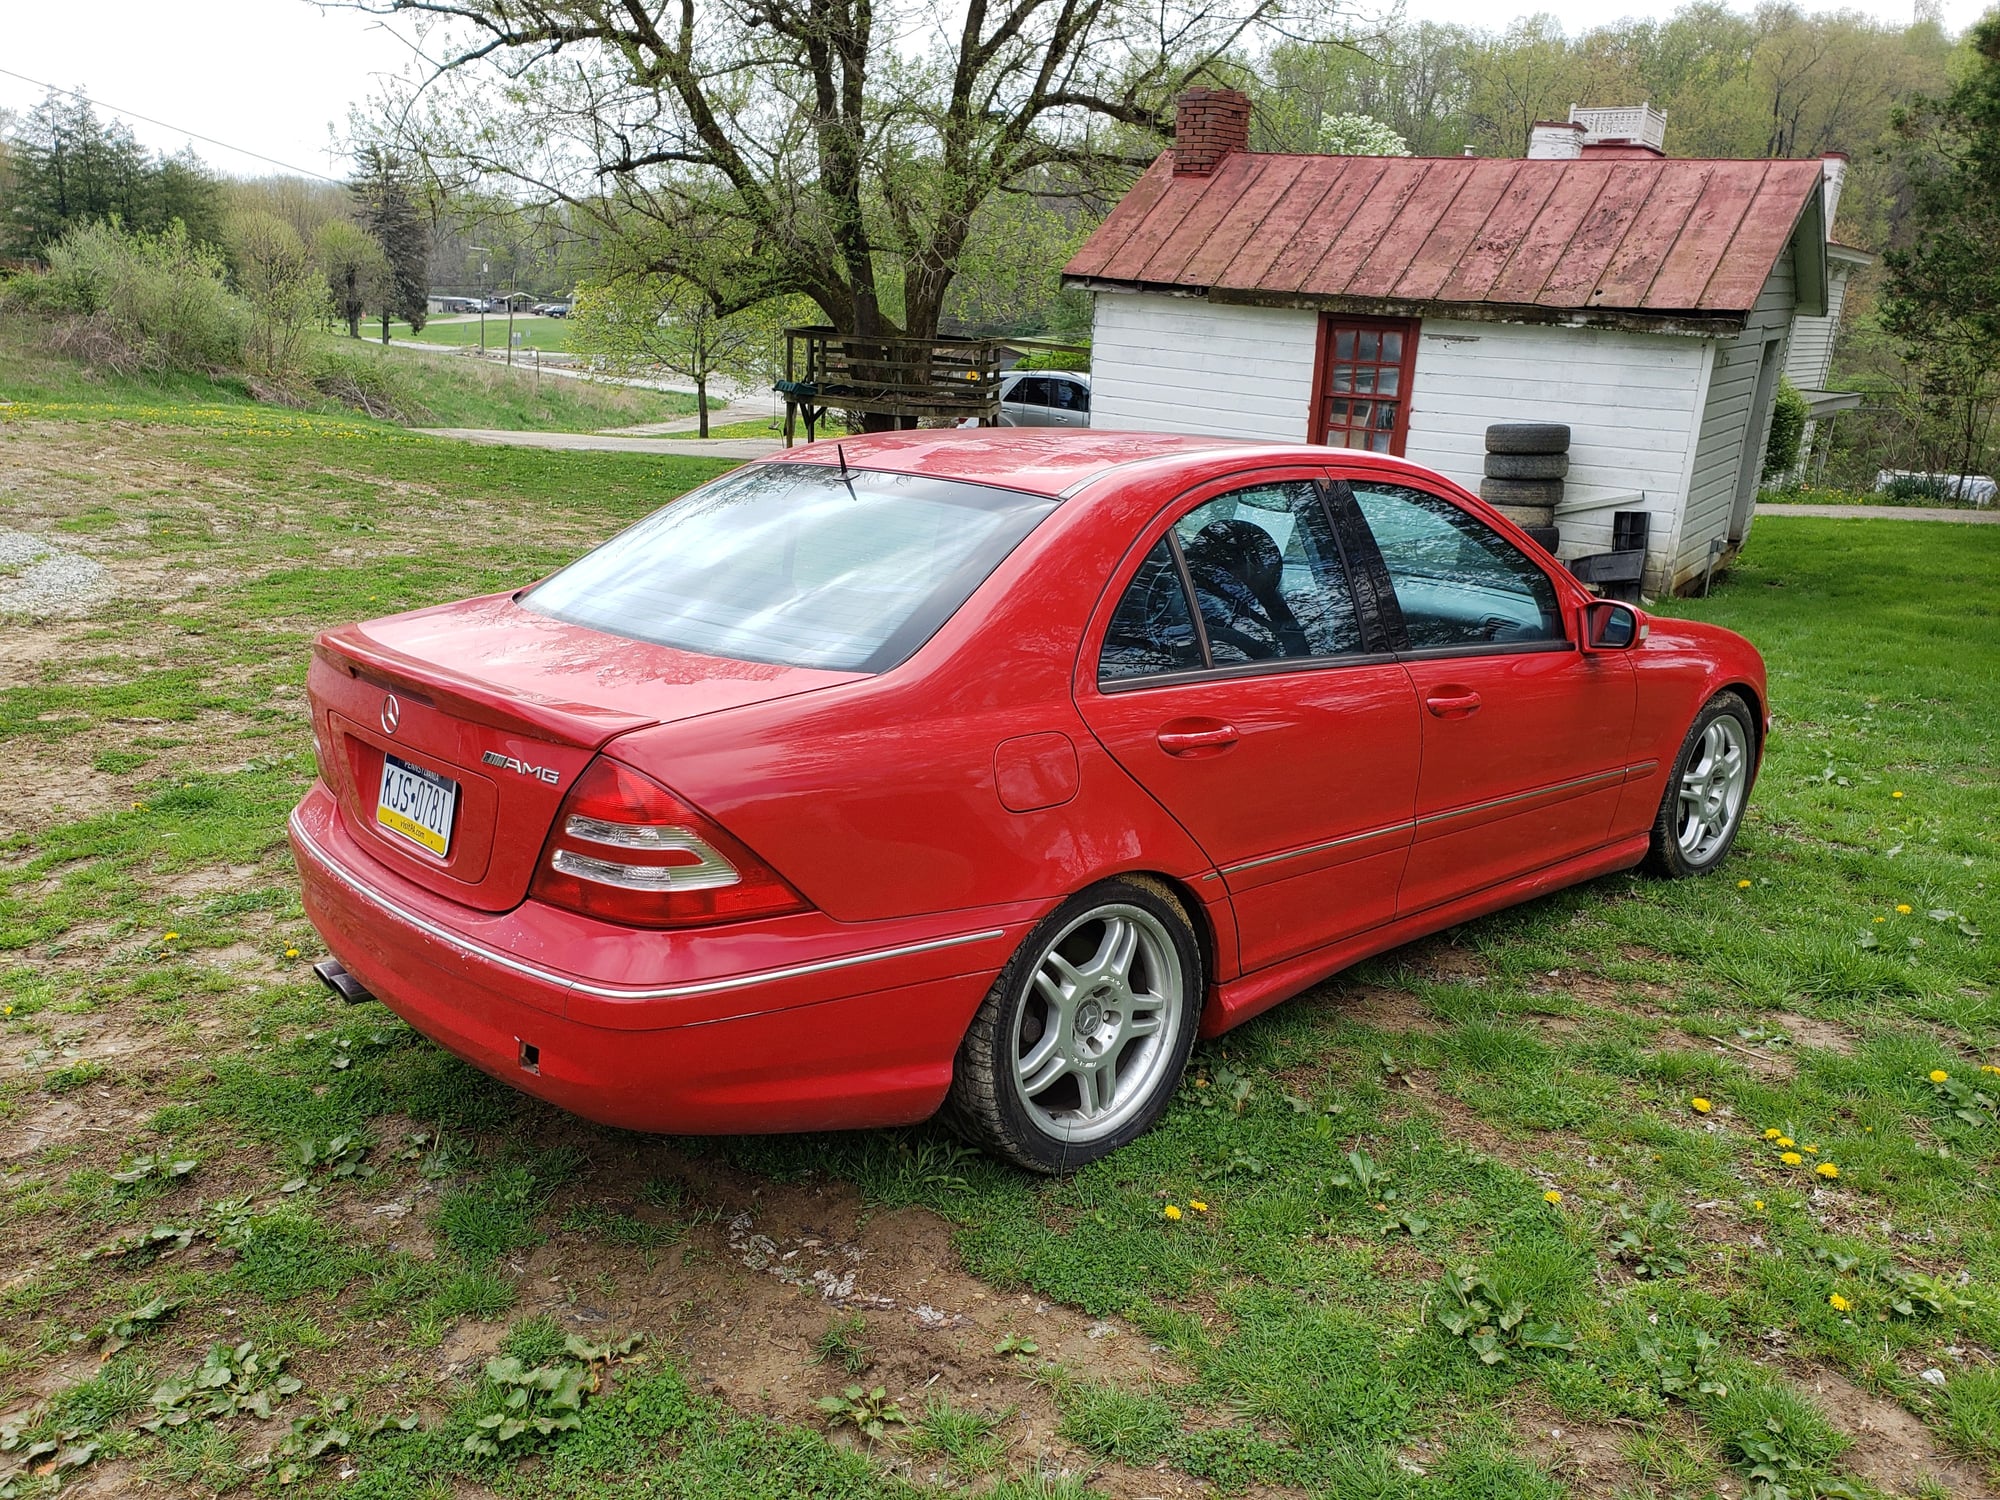 2002 Mercedes-Benz C32 AMG - 2002 C32 AMG FOR SALE - Used - VIN WDBRF65J12F160722 - 125,650 Miles - 6 cyl - 2WD - Automatic - Sedan - Red - Belle Vernon, PA 15012, United States